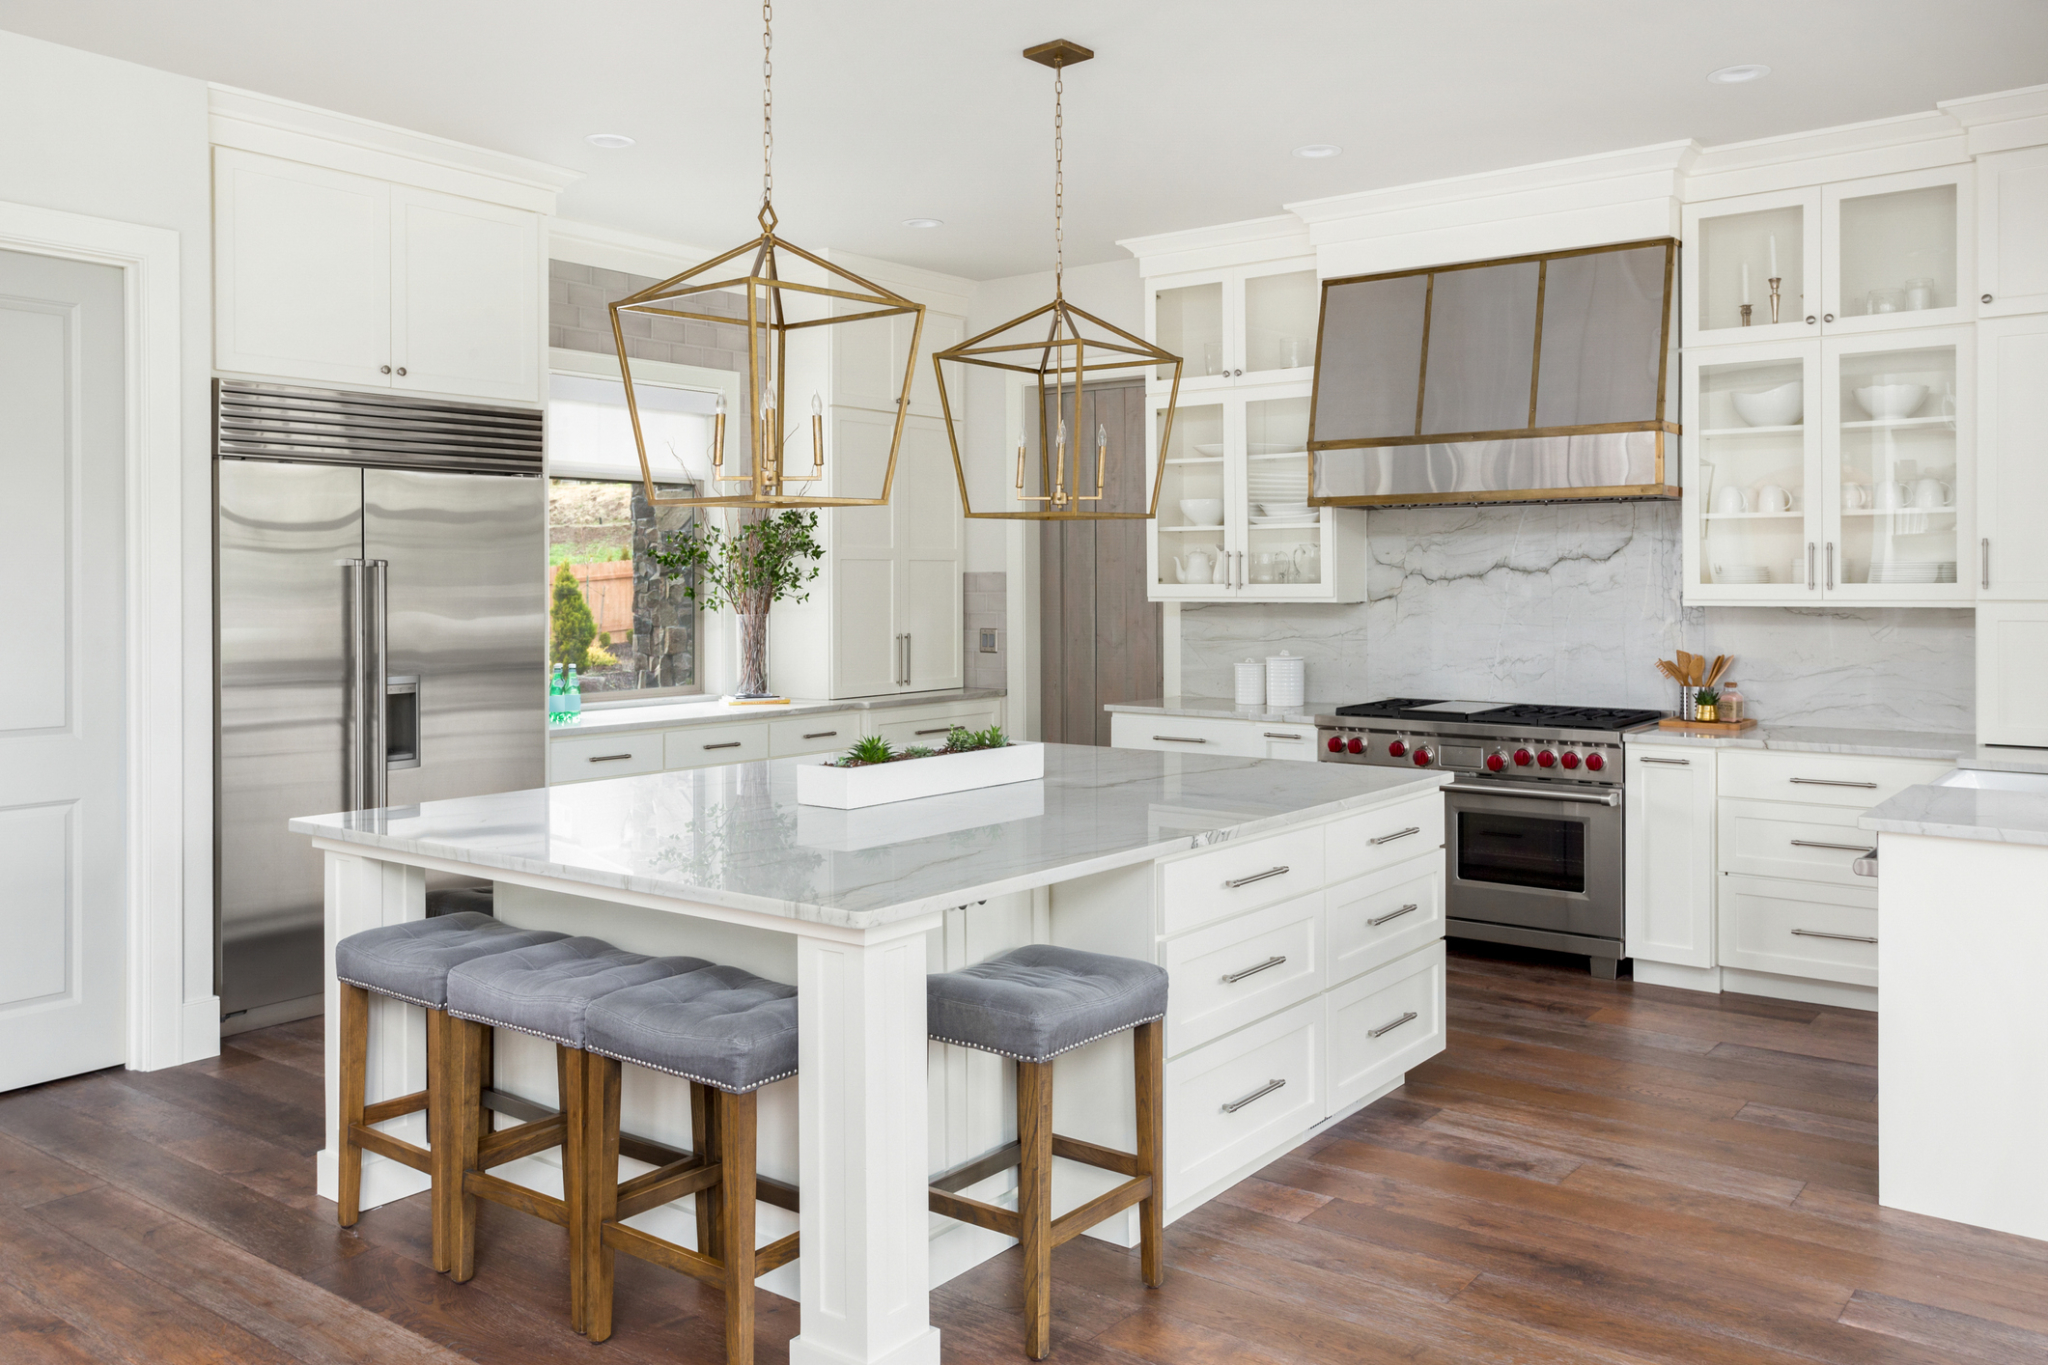 Here's what 2021 buyers want in a kitchen - Chicago Agent Magazine Trends